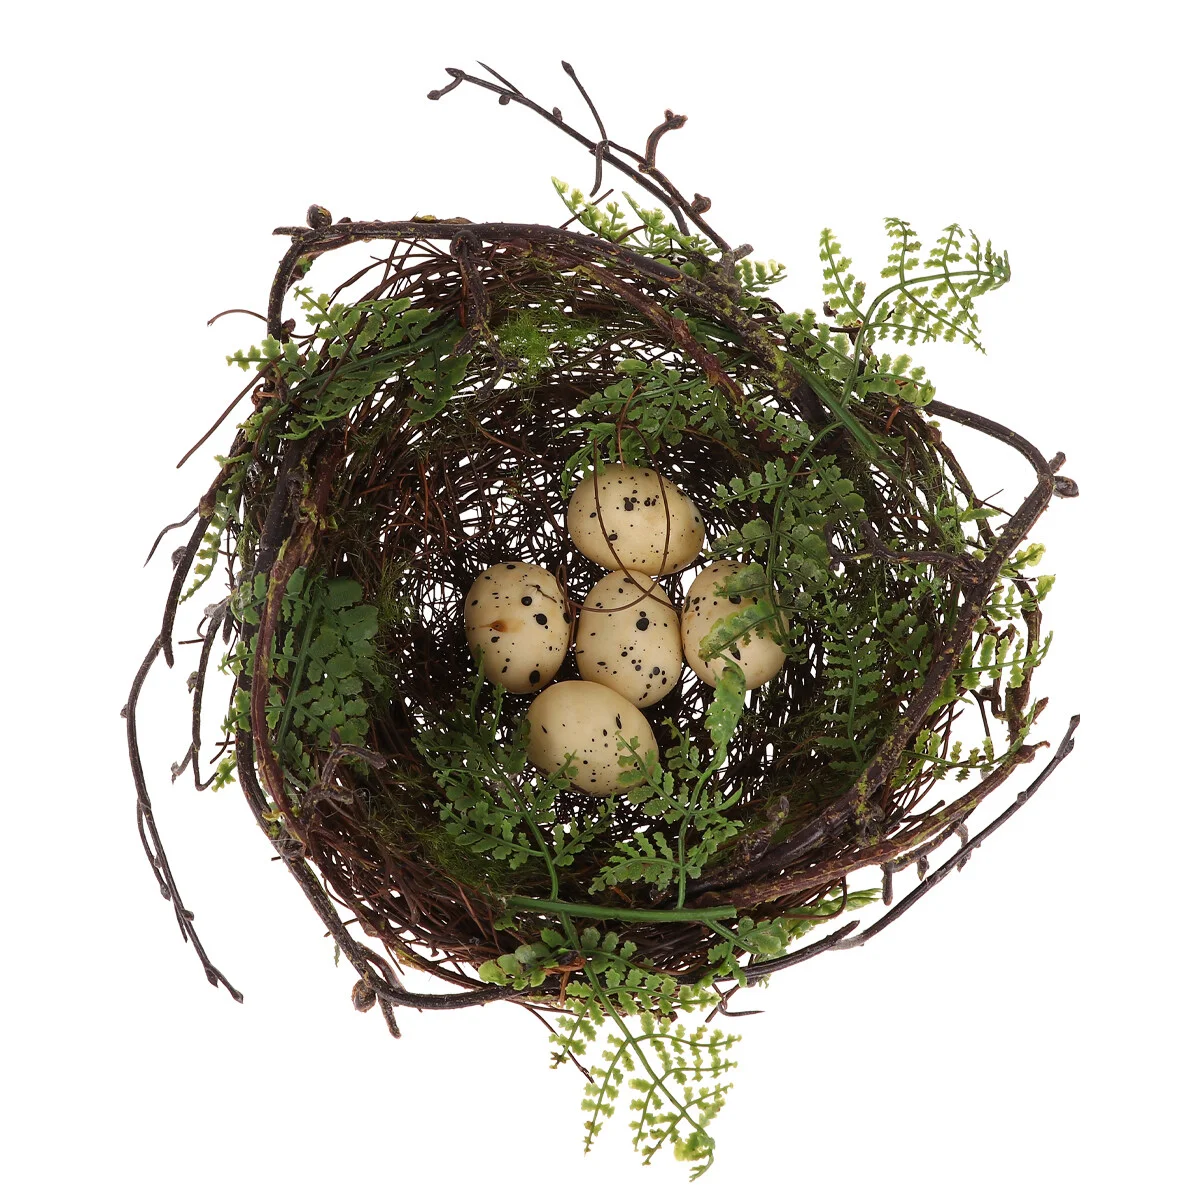 

Birds Nests And Eggss Nest Crafts Natural Birds Nests And Eggss Nest with Eggs Ornaments for Garden Home Party Decor Props Moss